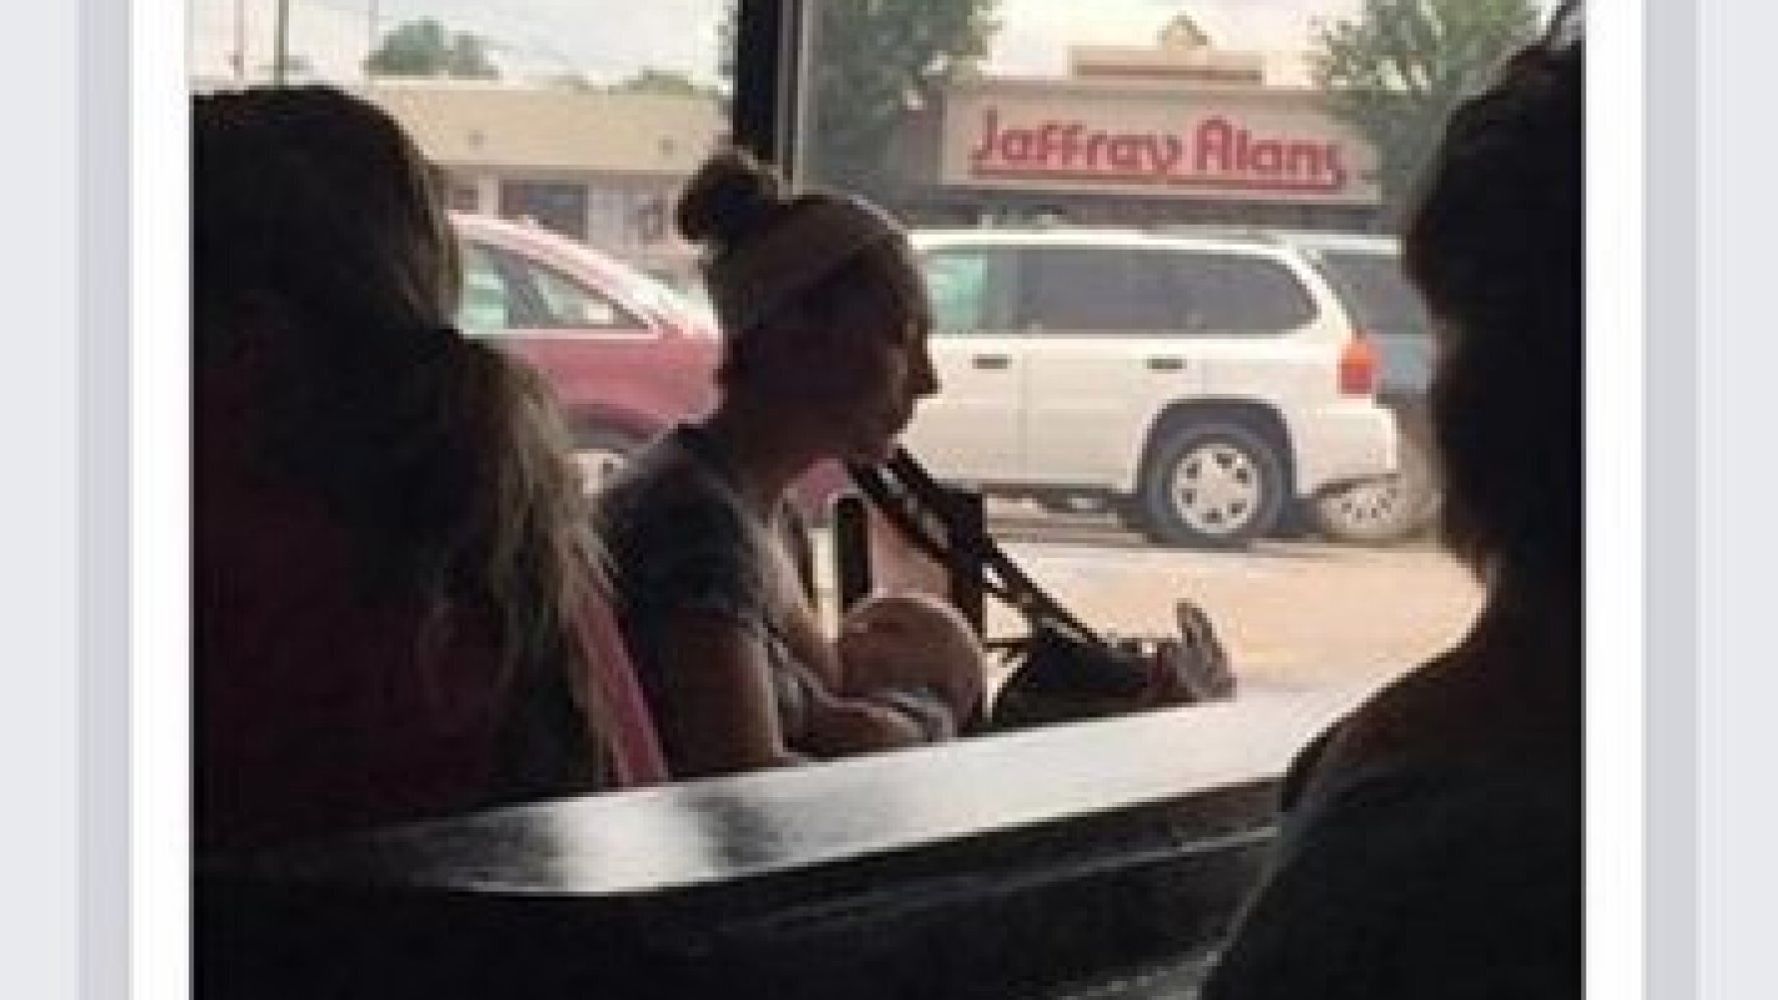 Man Publicly Shames Woman Breastfeeding Then She Finds The Photo And 